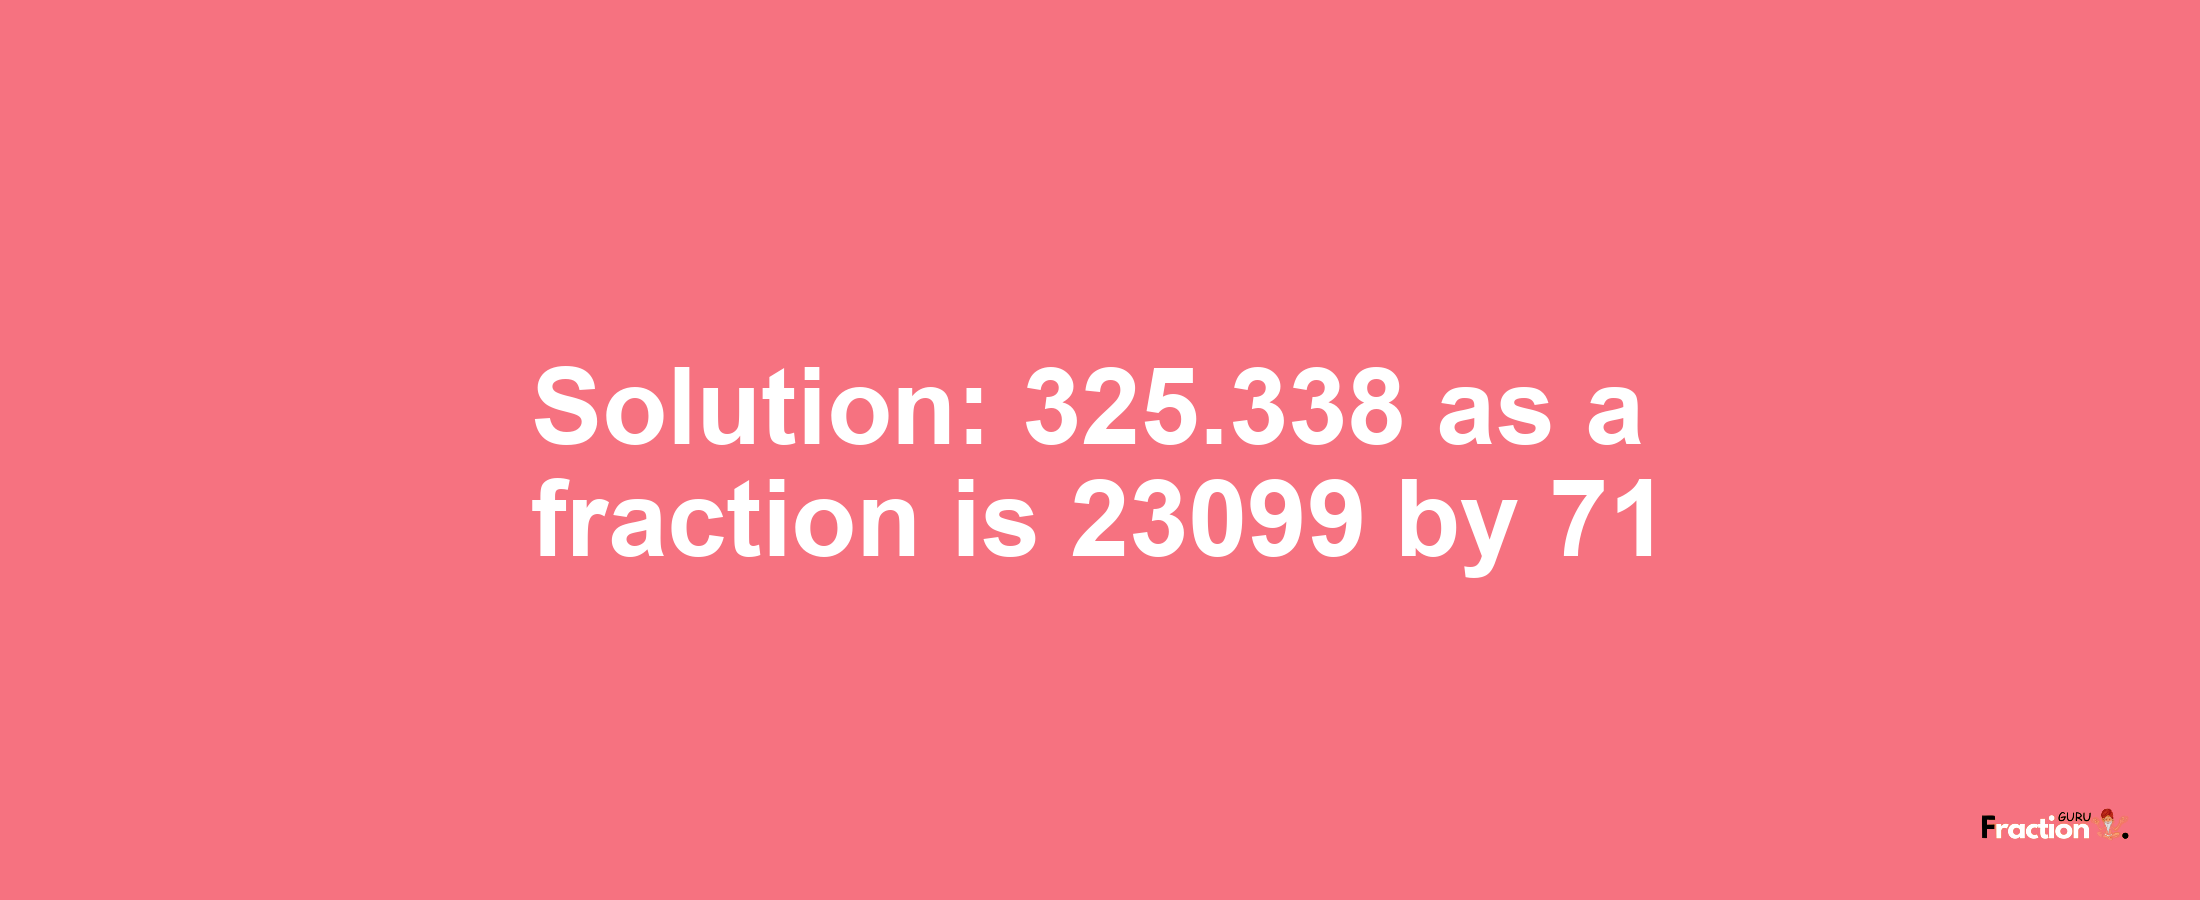 Solution:325.338 as a fraction is 23099/71